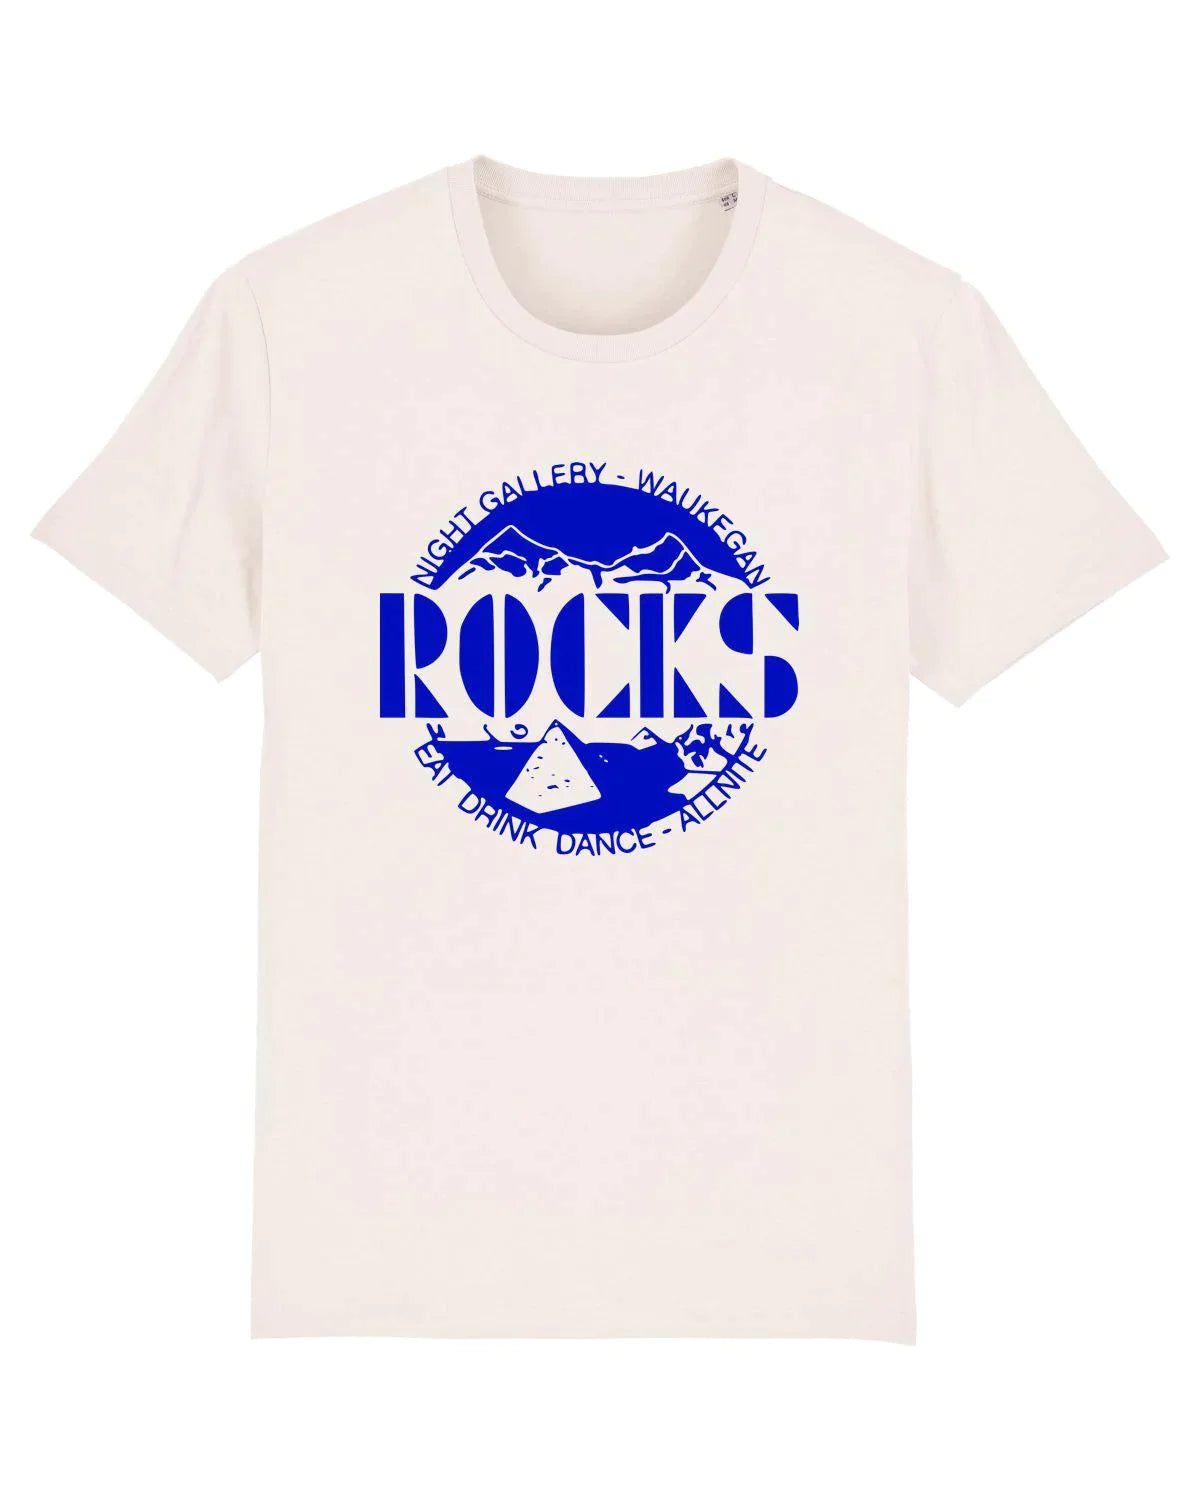 THE RAMONES ROCK: T-Shirt As Worn by Johnny Ramone (The Ramones) - SOUND IS COLOUR